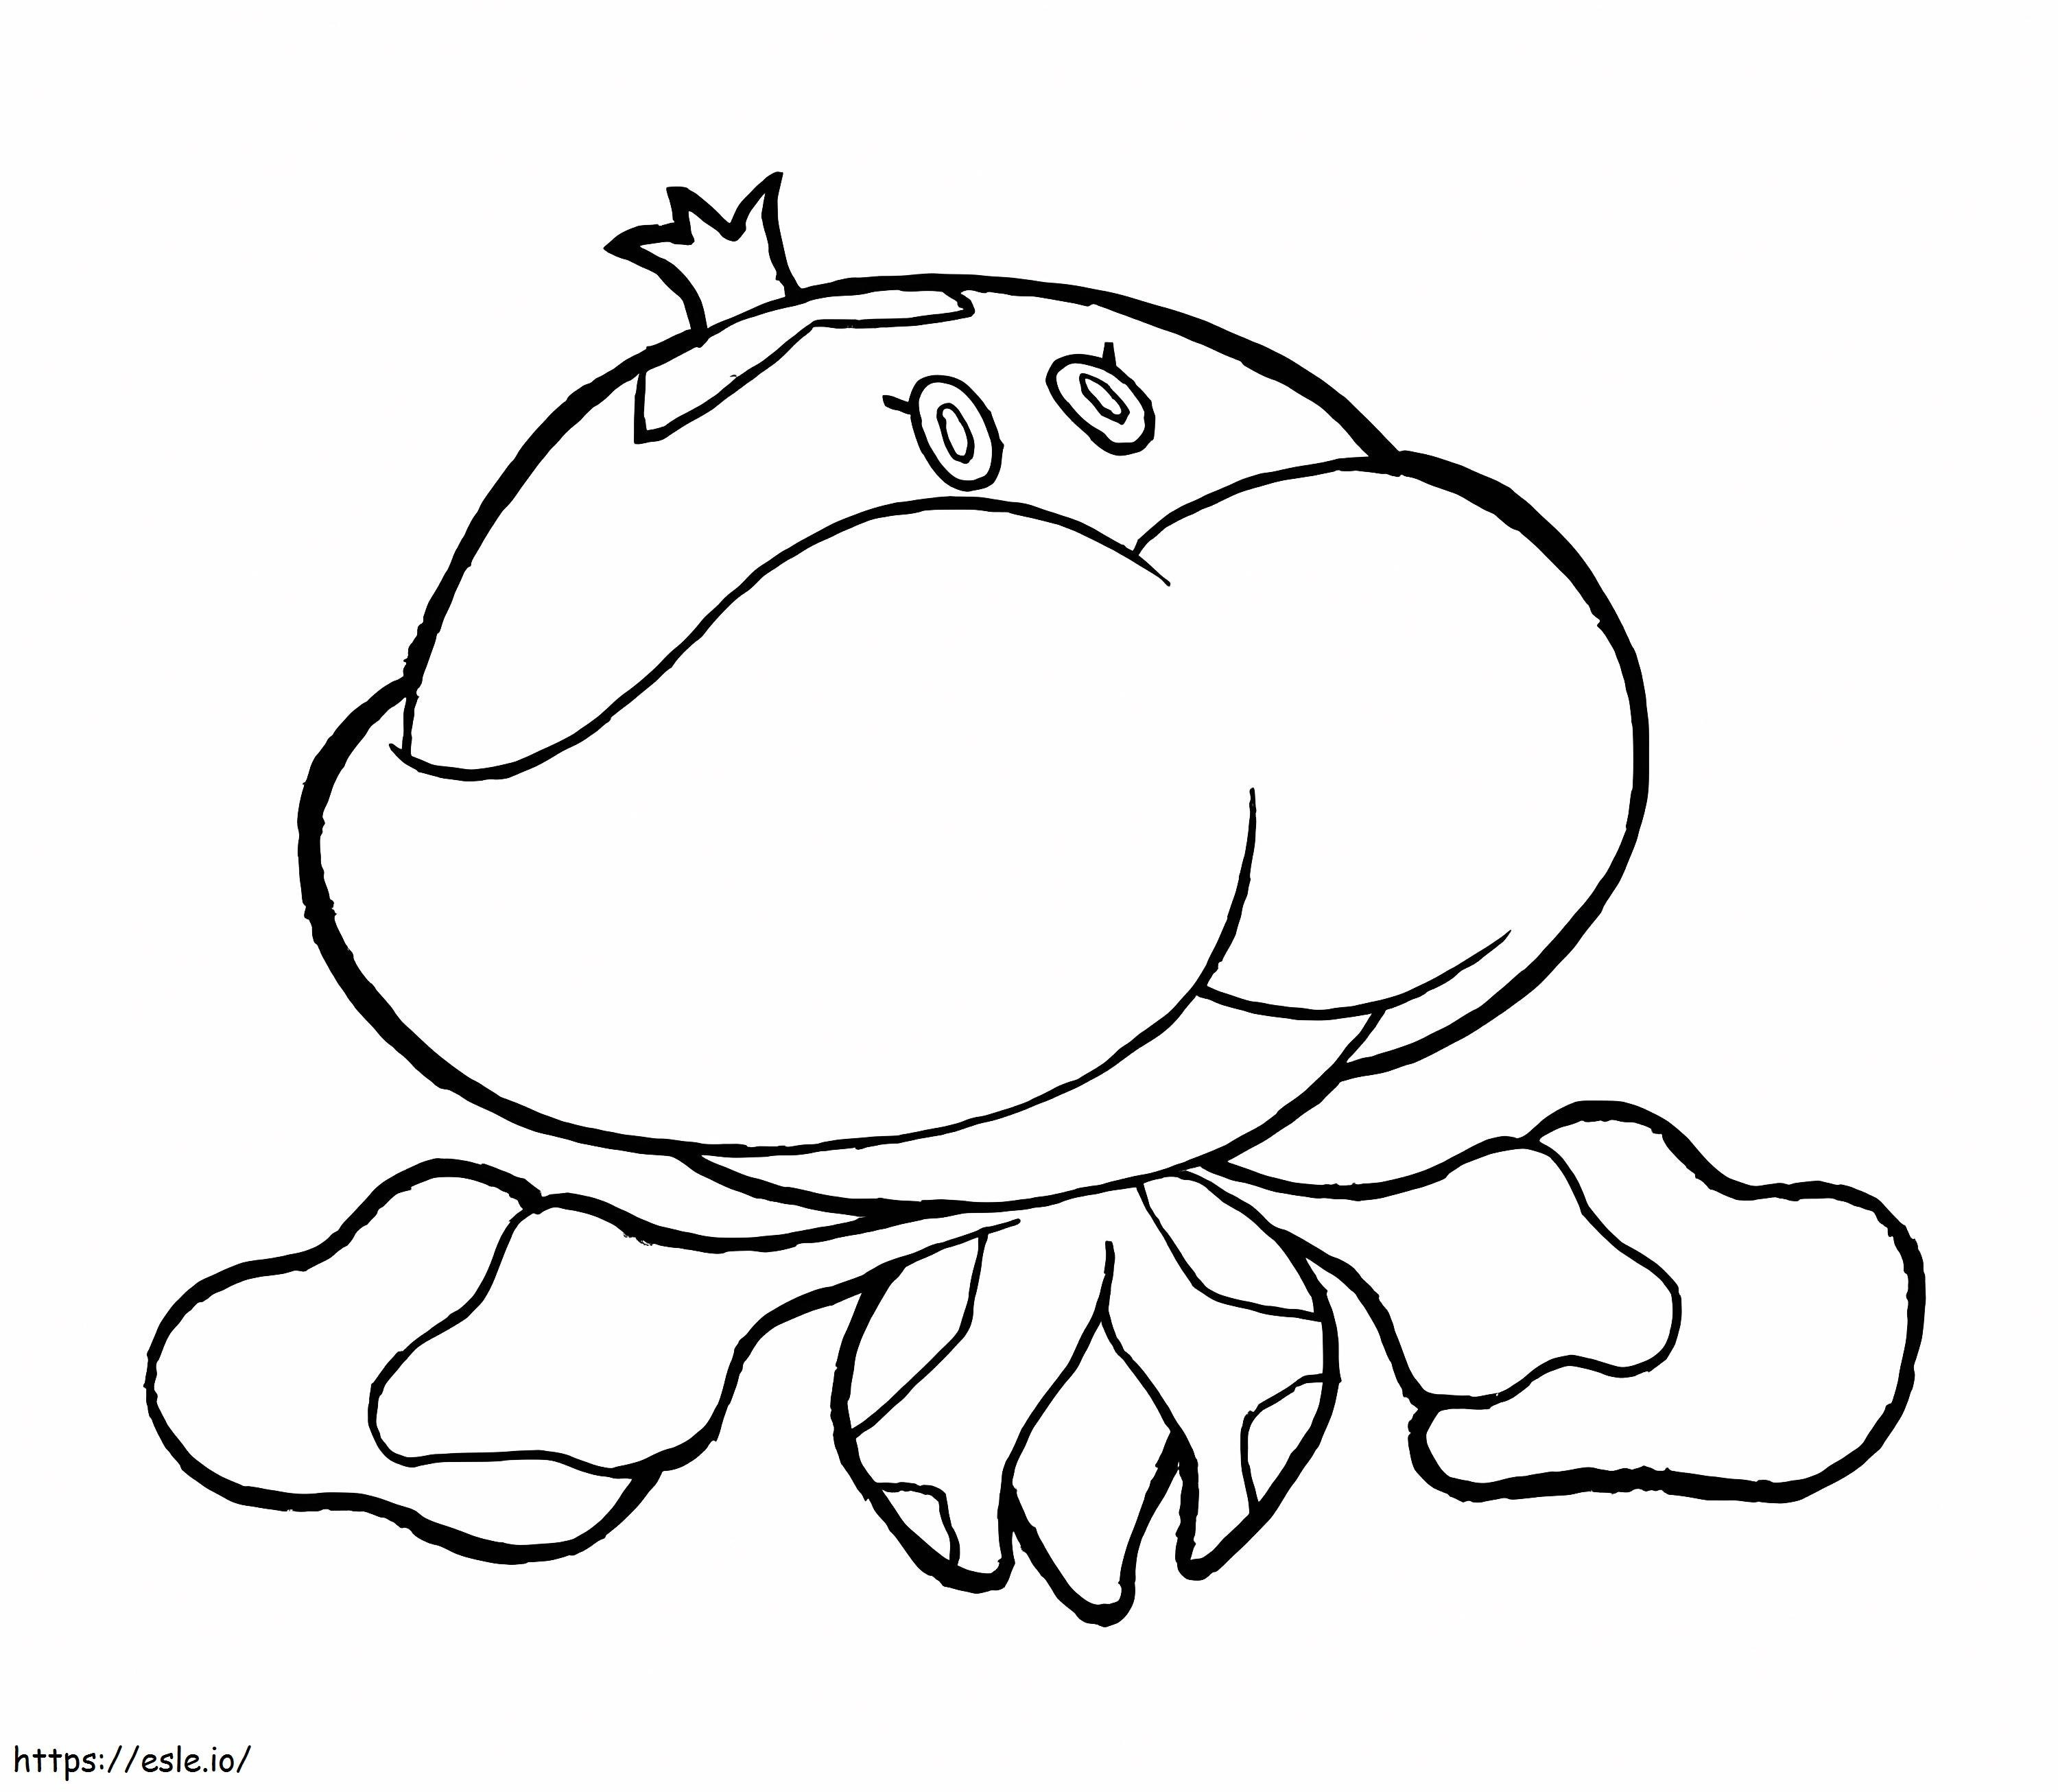 Male Jellicent coloring page